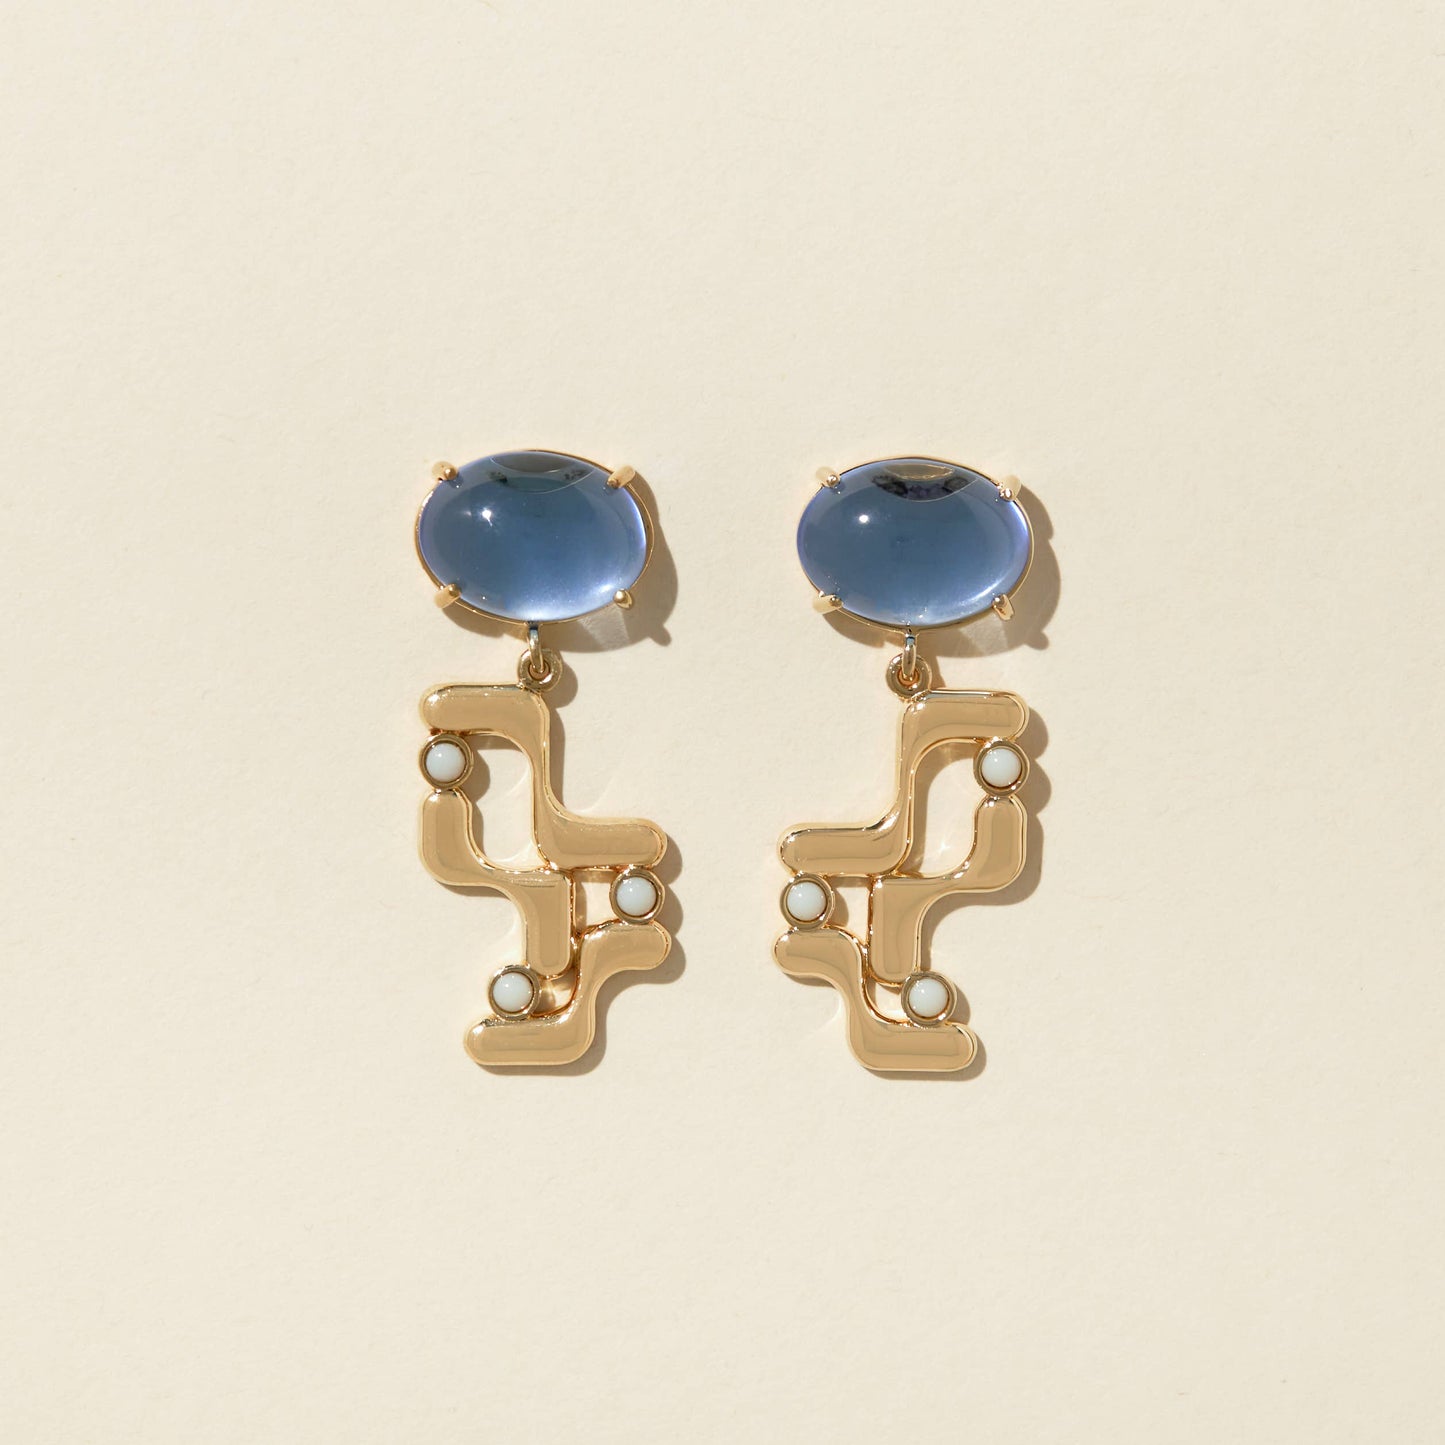 straight front view of the halsted earrings on a beige background